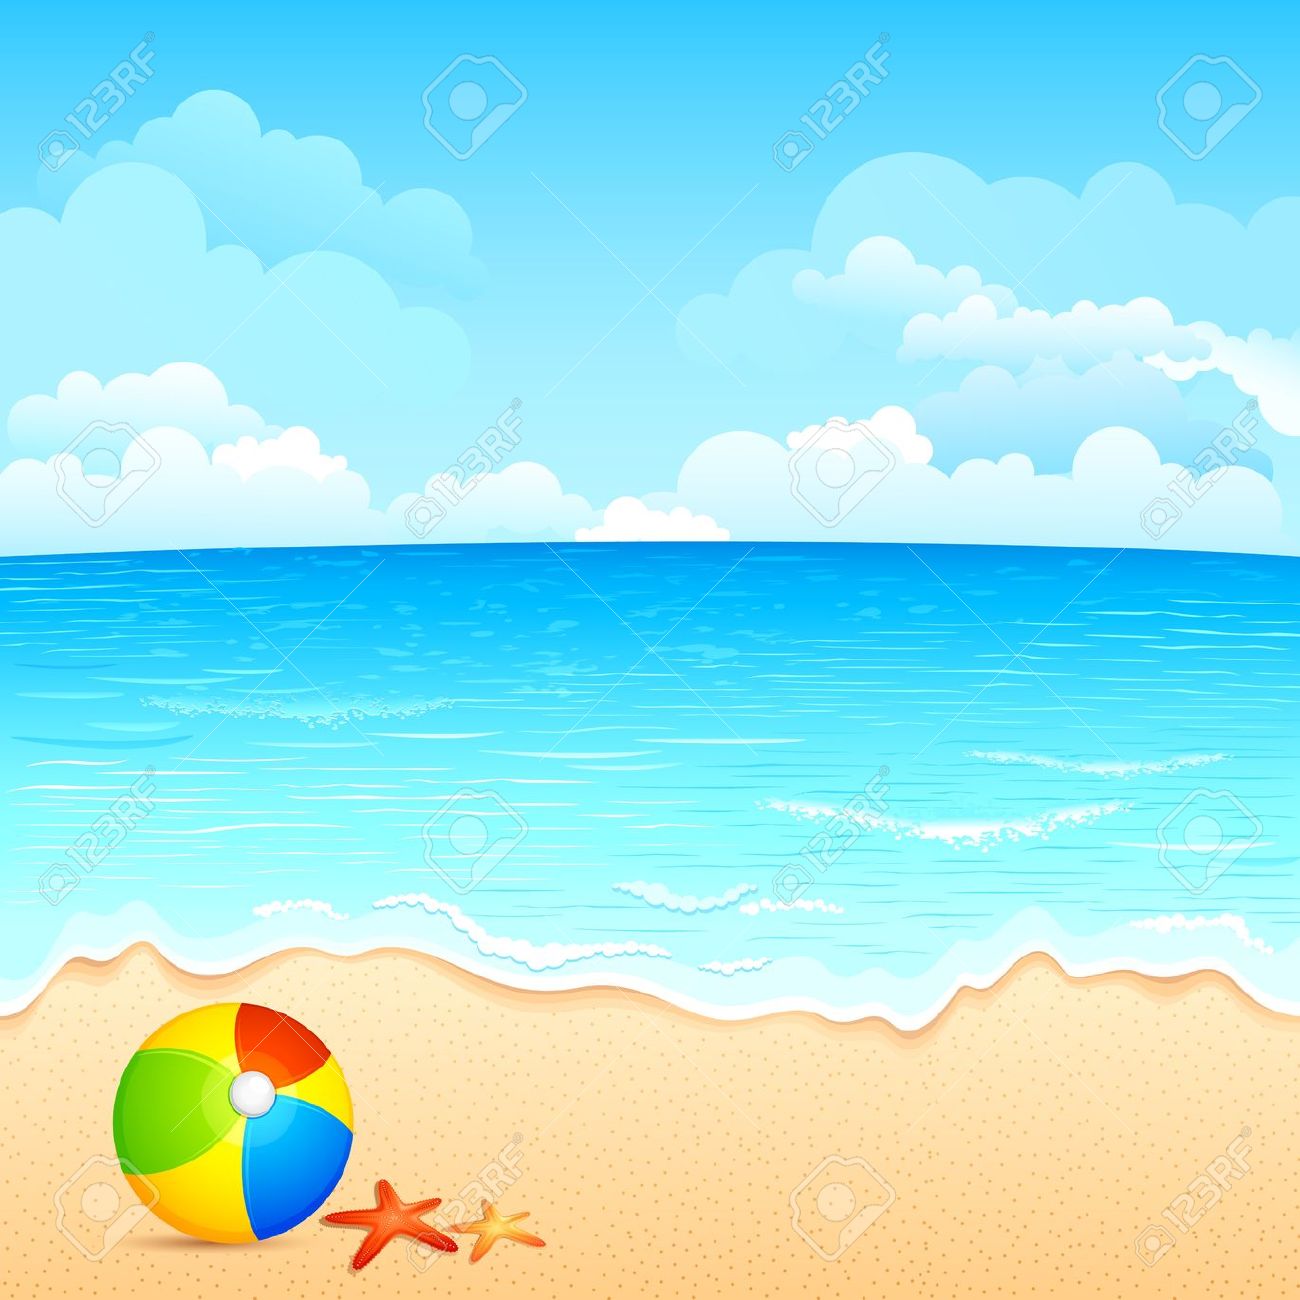 free summer clip art backgrounds - photo #37